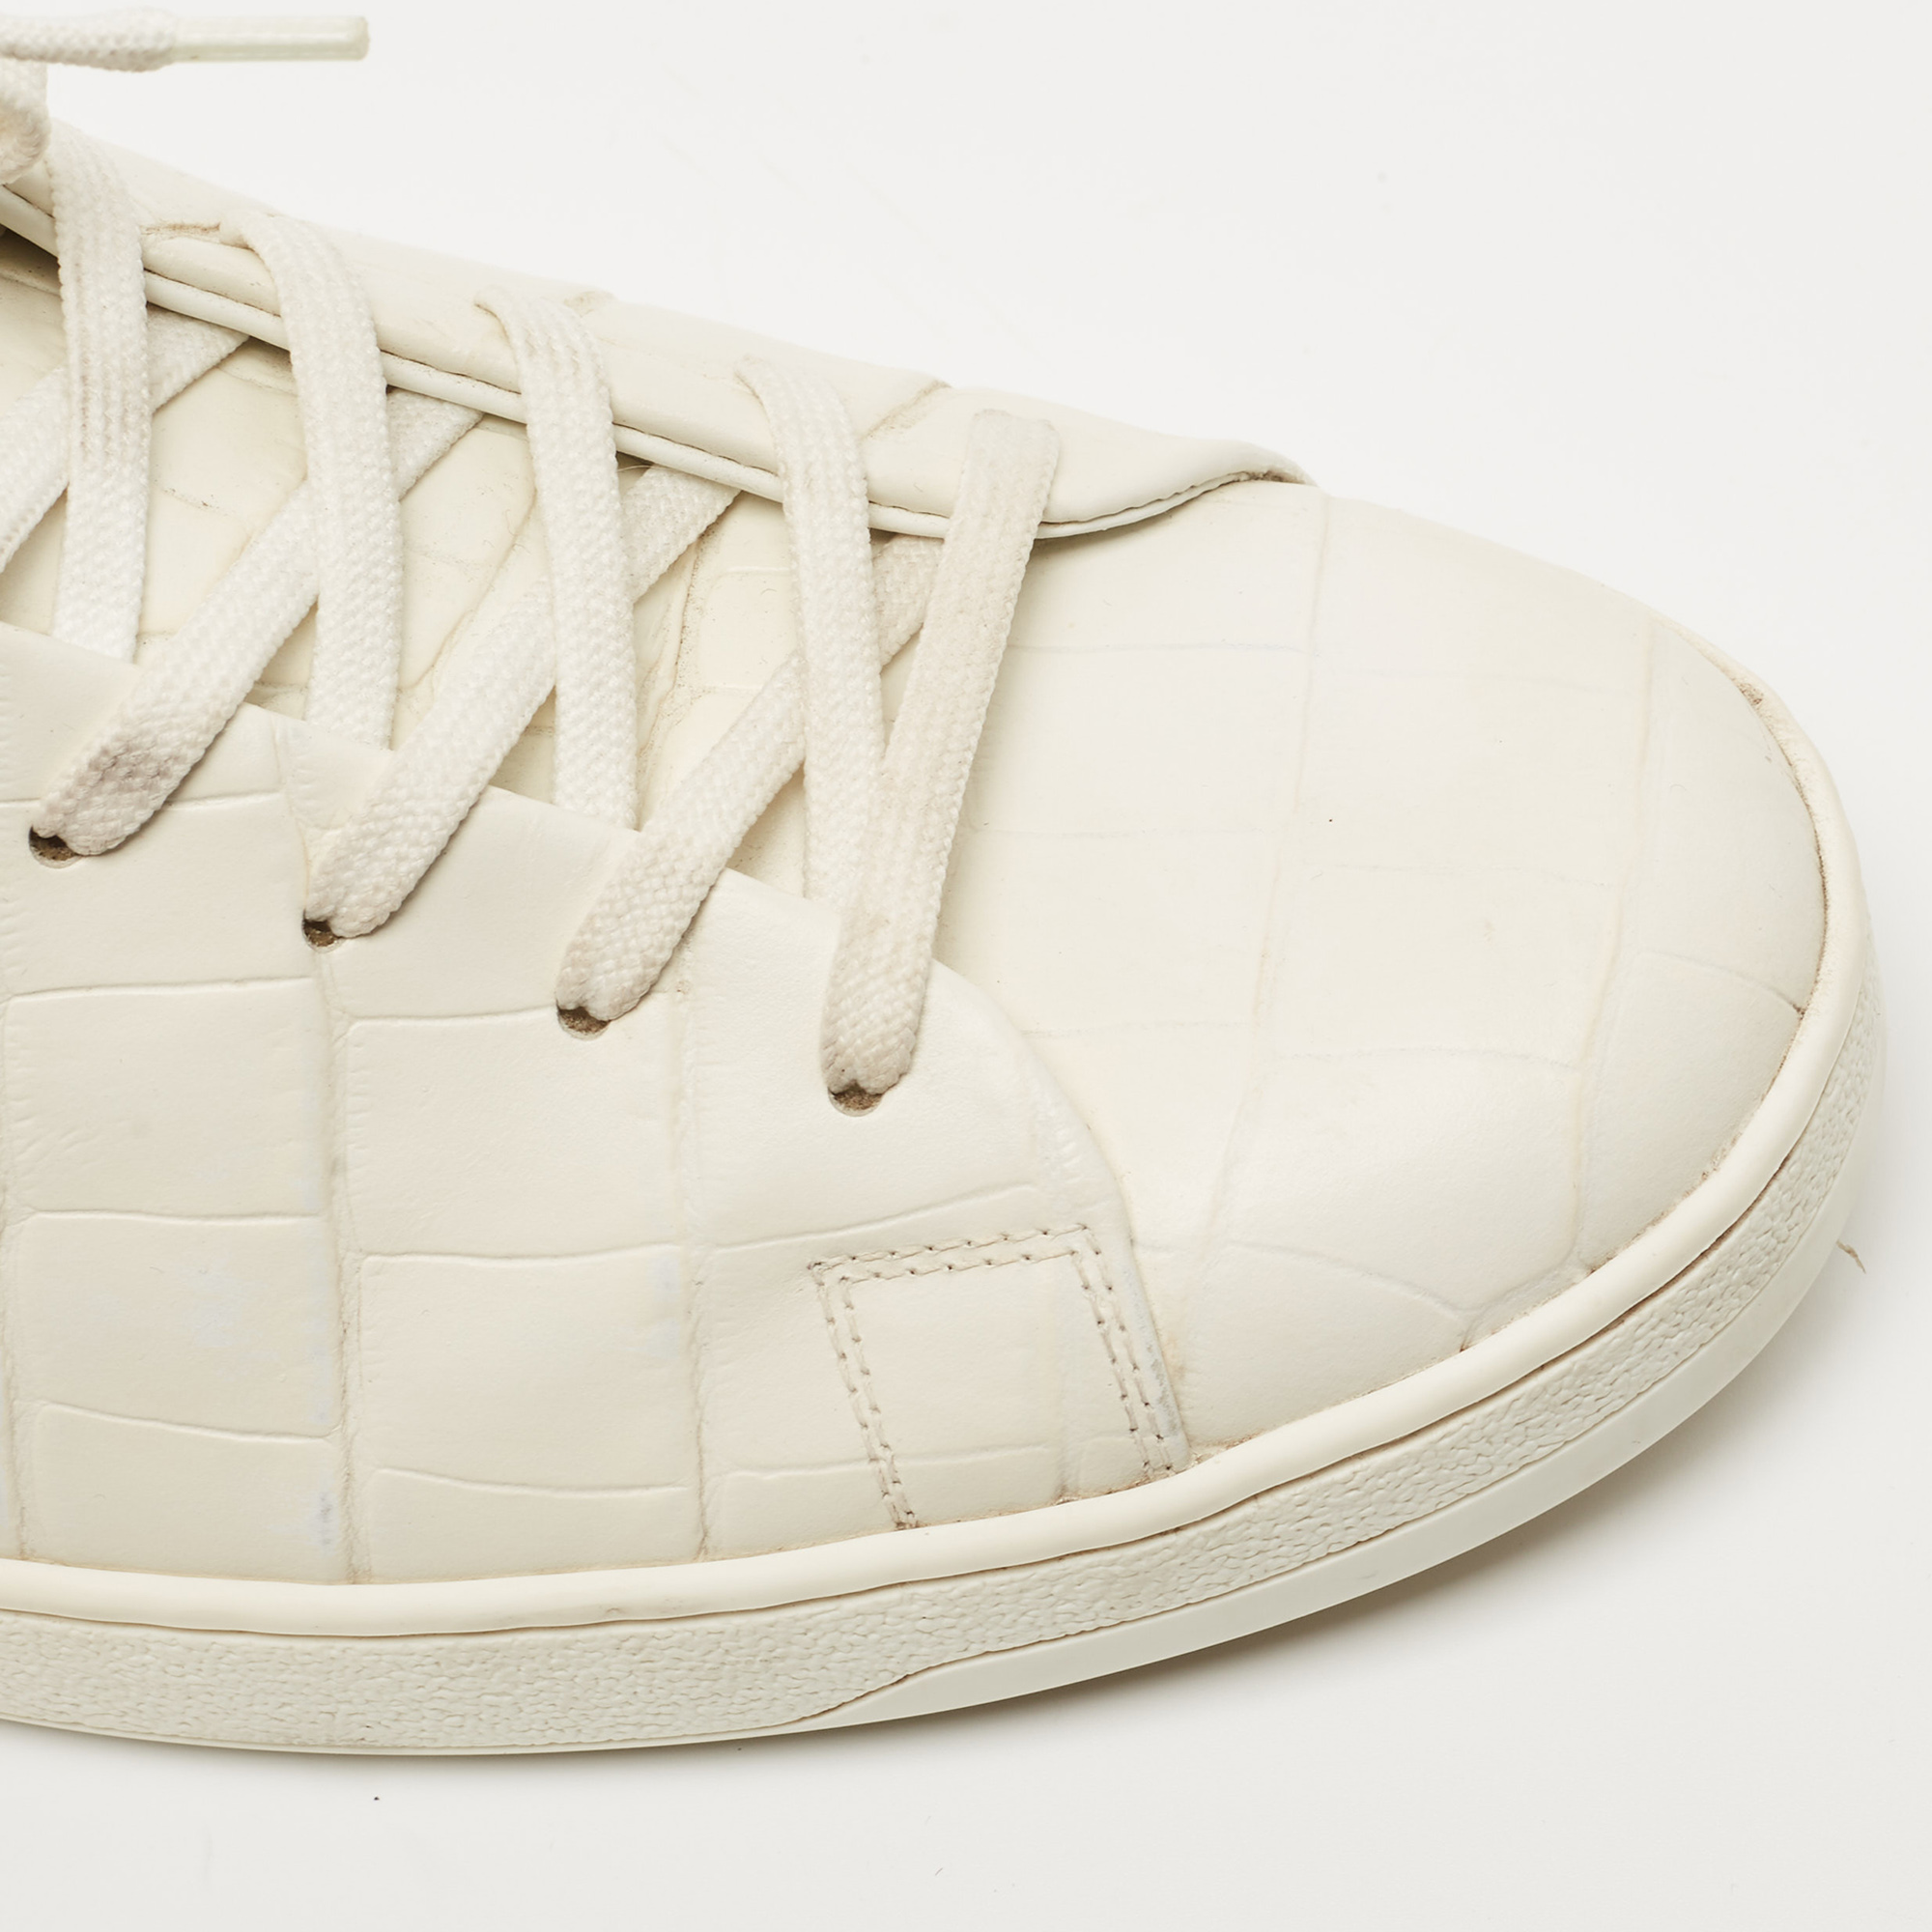 Louis Vuitton White Leather Croc Embossed Leather Frontrow Low Top Sneakers Size 43.5